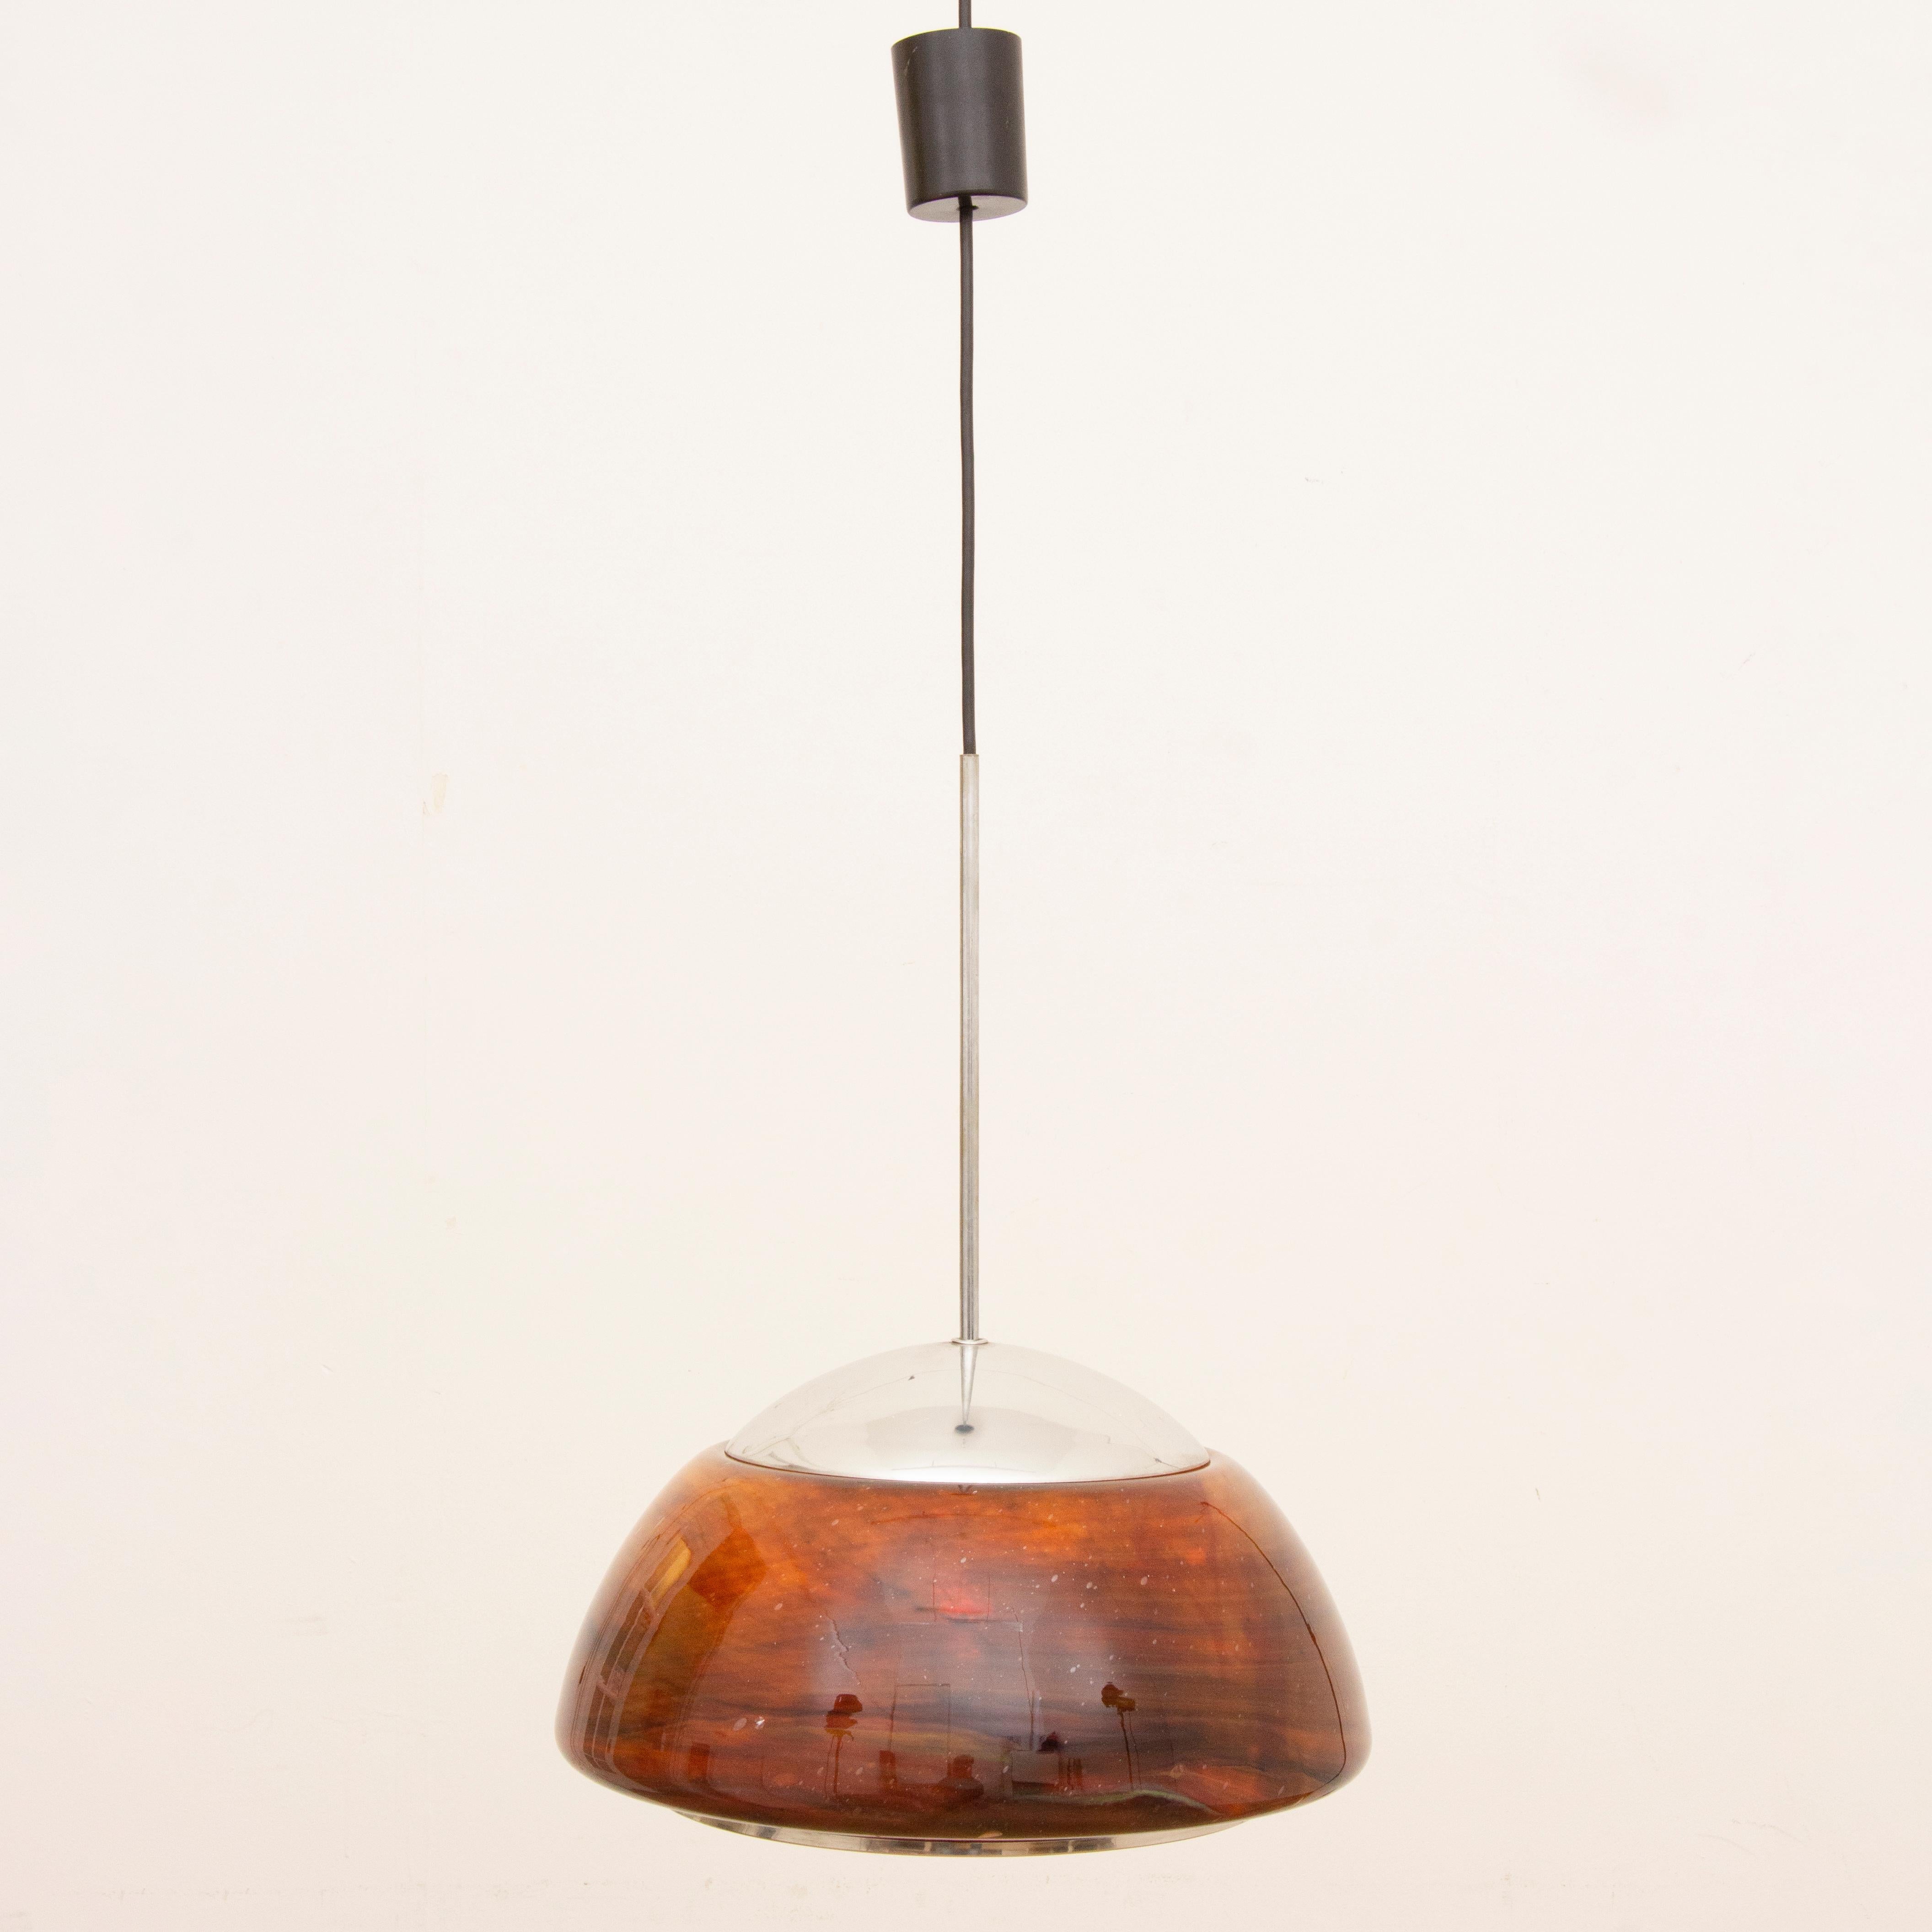 1970s Piell & Putzler space age hanging light with a thick brown and black mottled glass shade suspended from a chrome fitting and black flex. A chrome ring is fitted to the underside of the light. The light is beautiful when lit when the deep